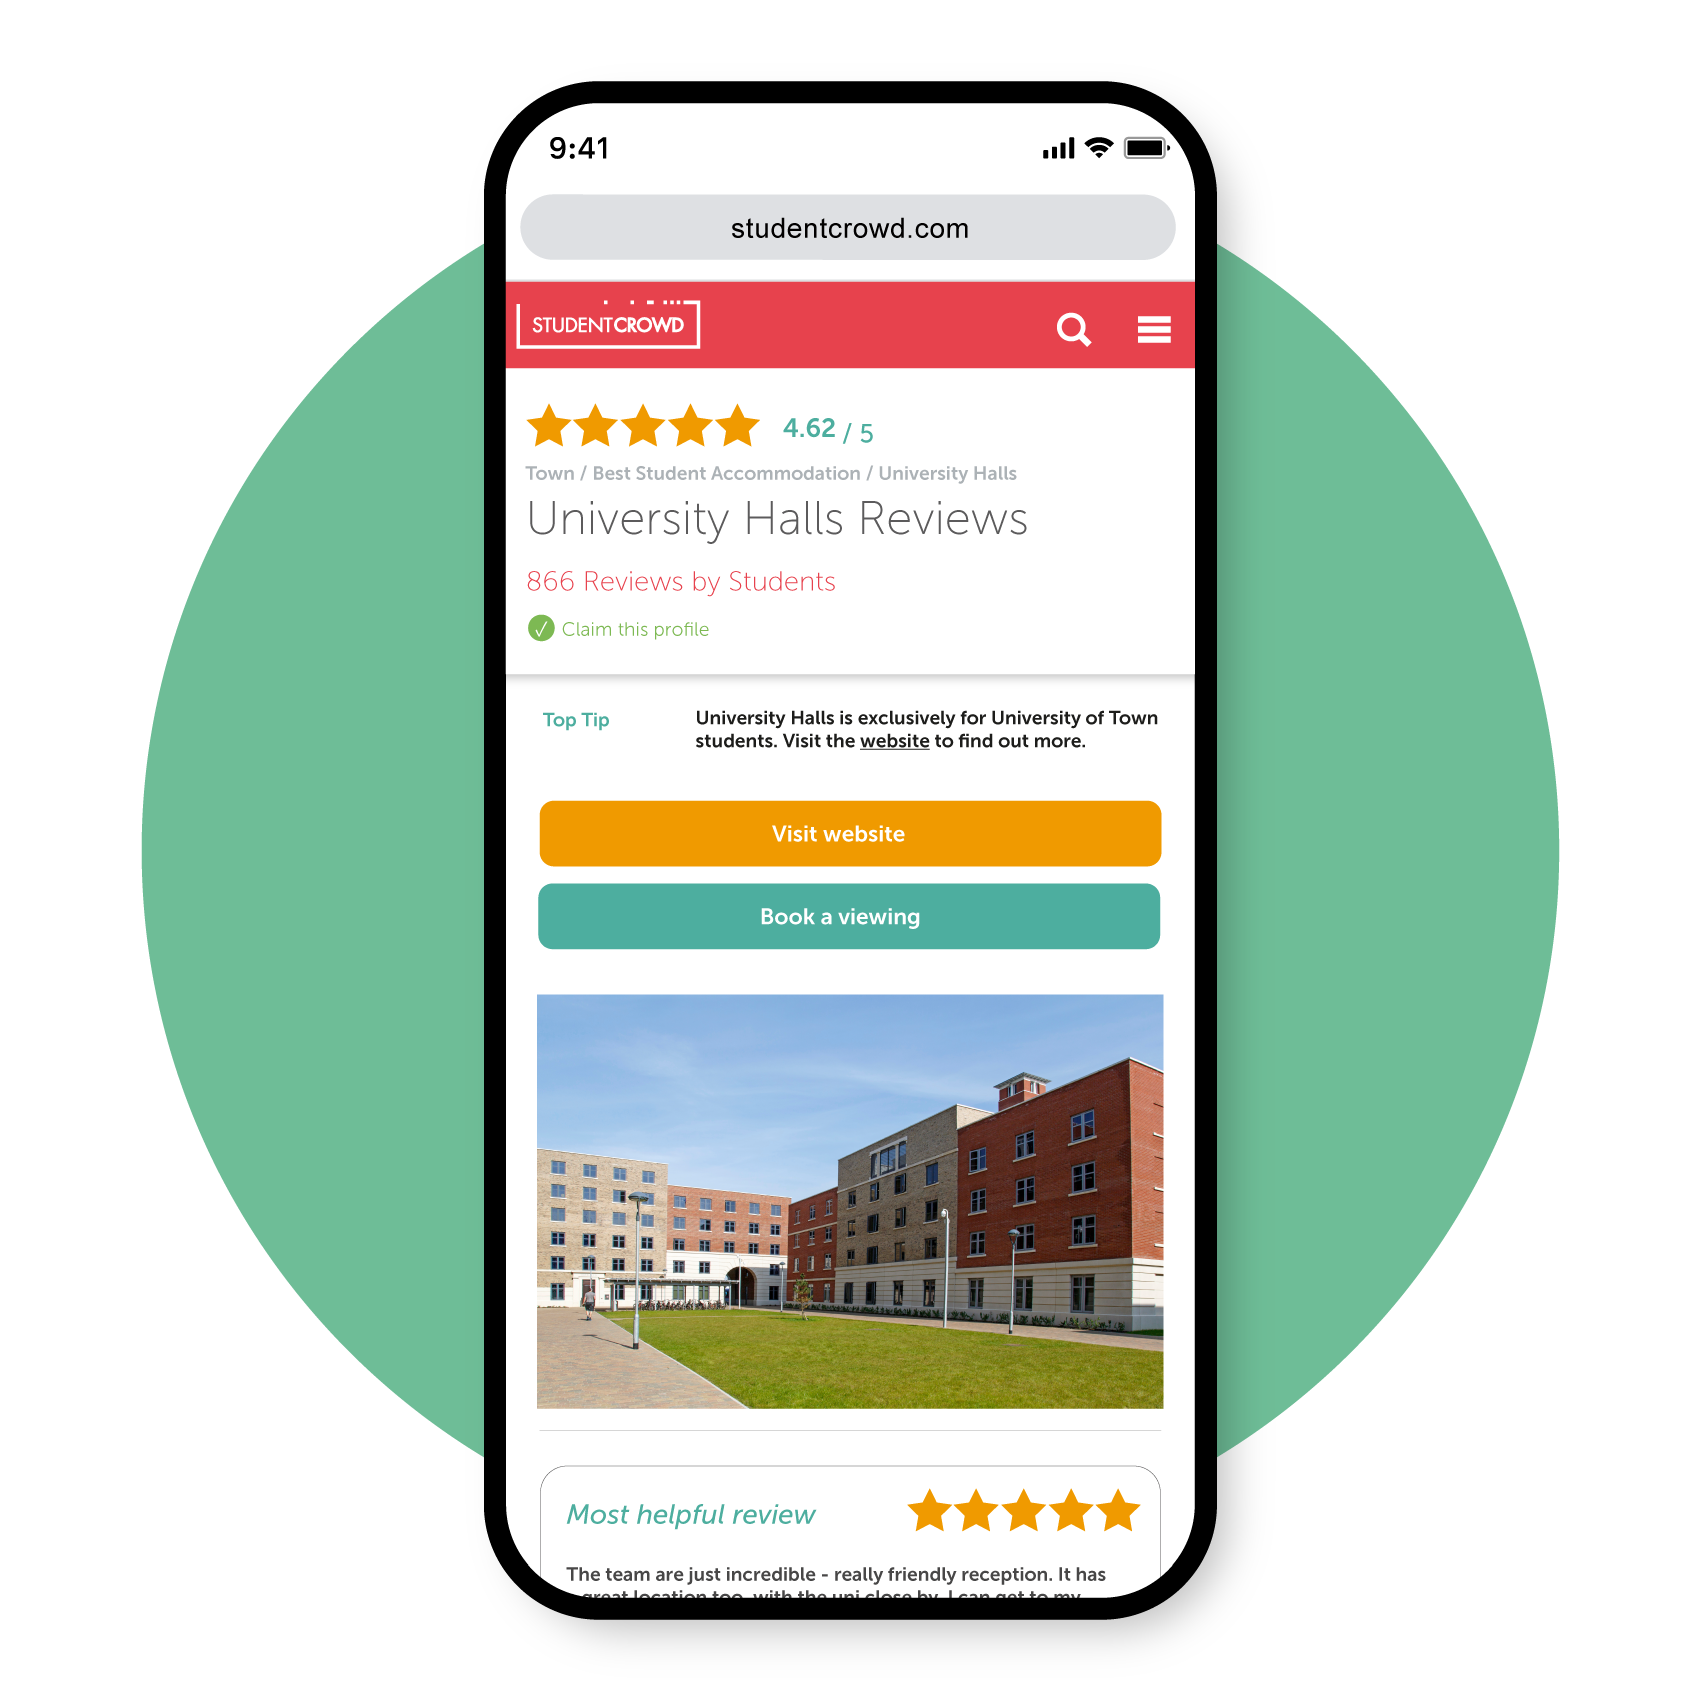 University Halls reviews on StudentCrowd shown on a mobile phone screen